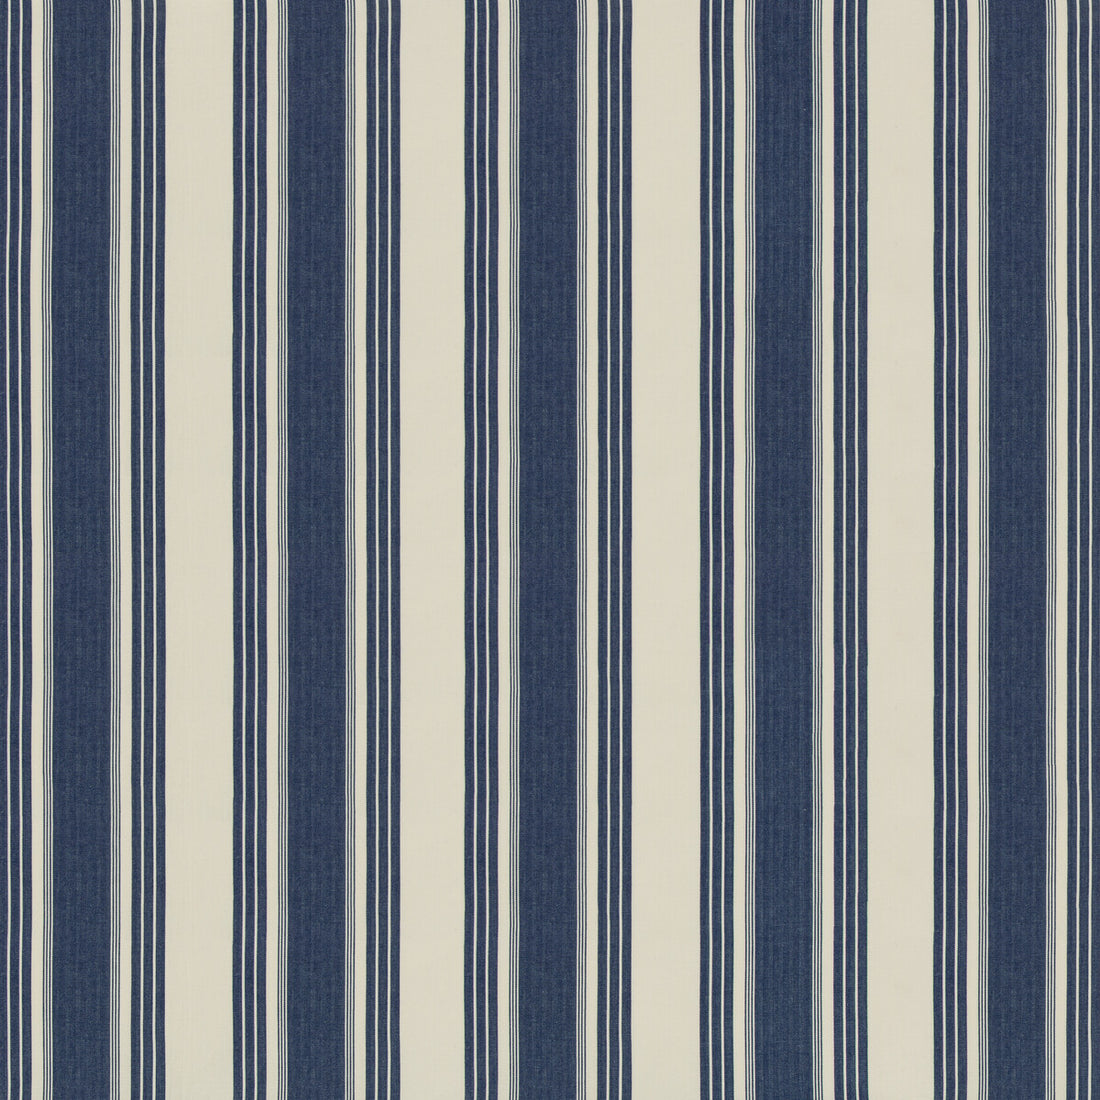 Colmar Stripe fabric in denim color - pattern 8019110.5.0 - by Brunschwig &amp; Fils in the Folio Francais collection